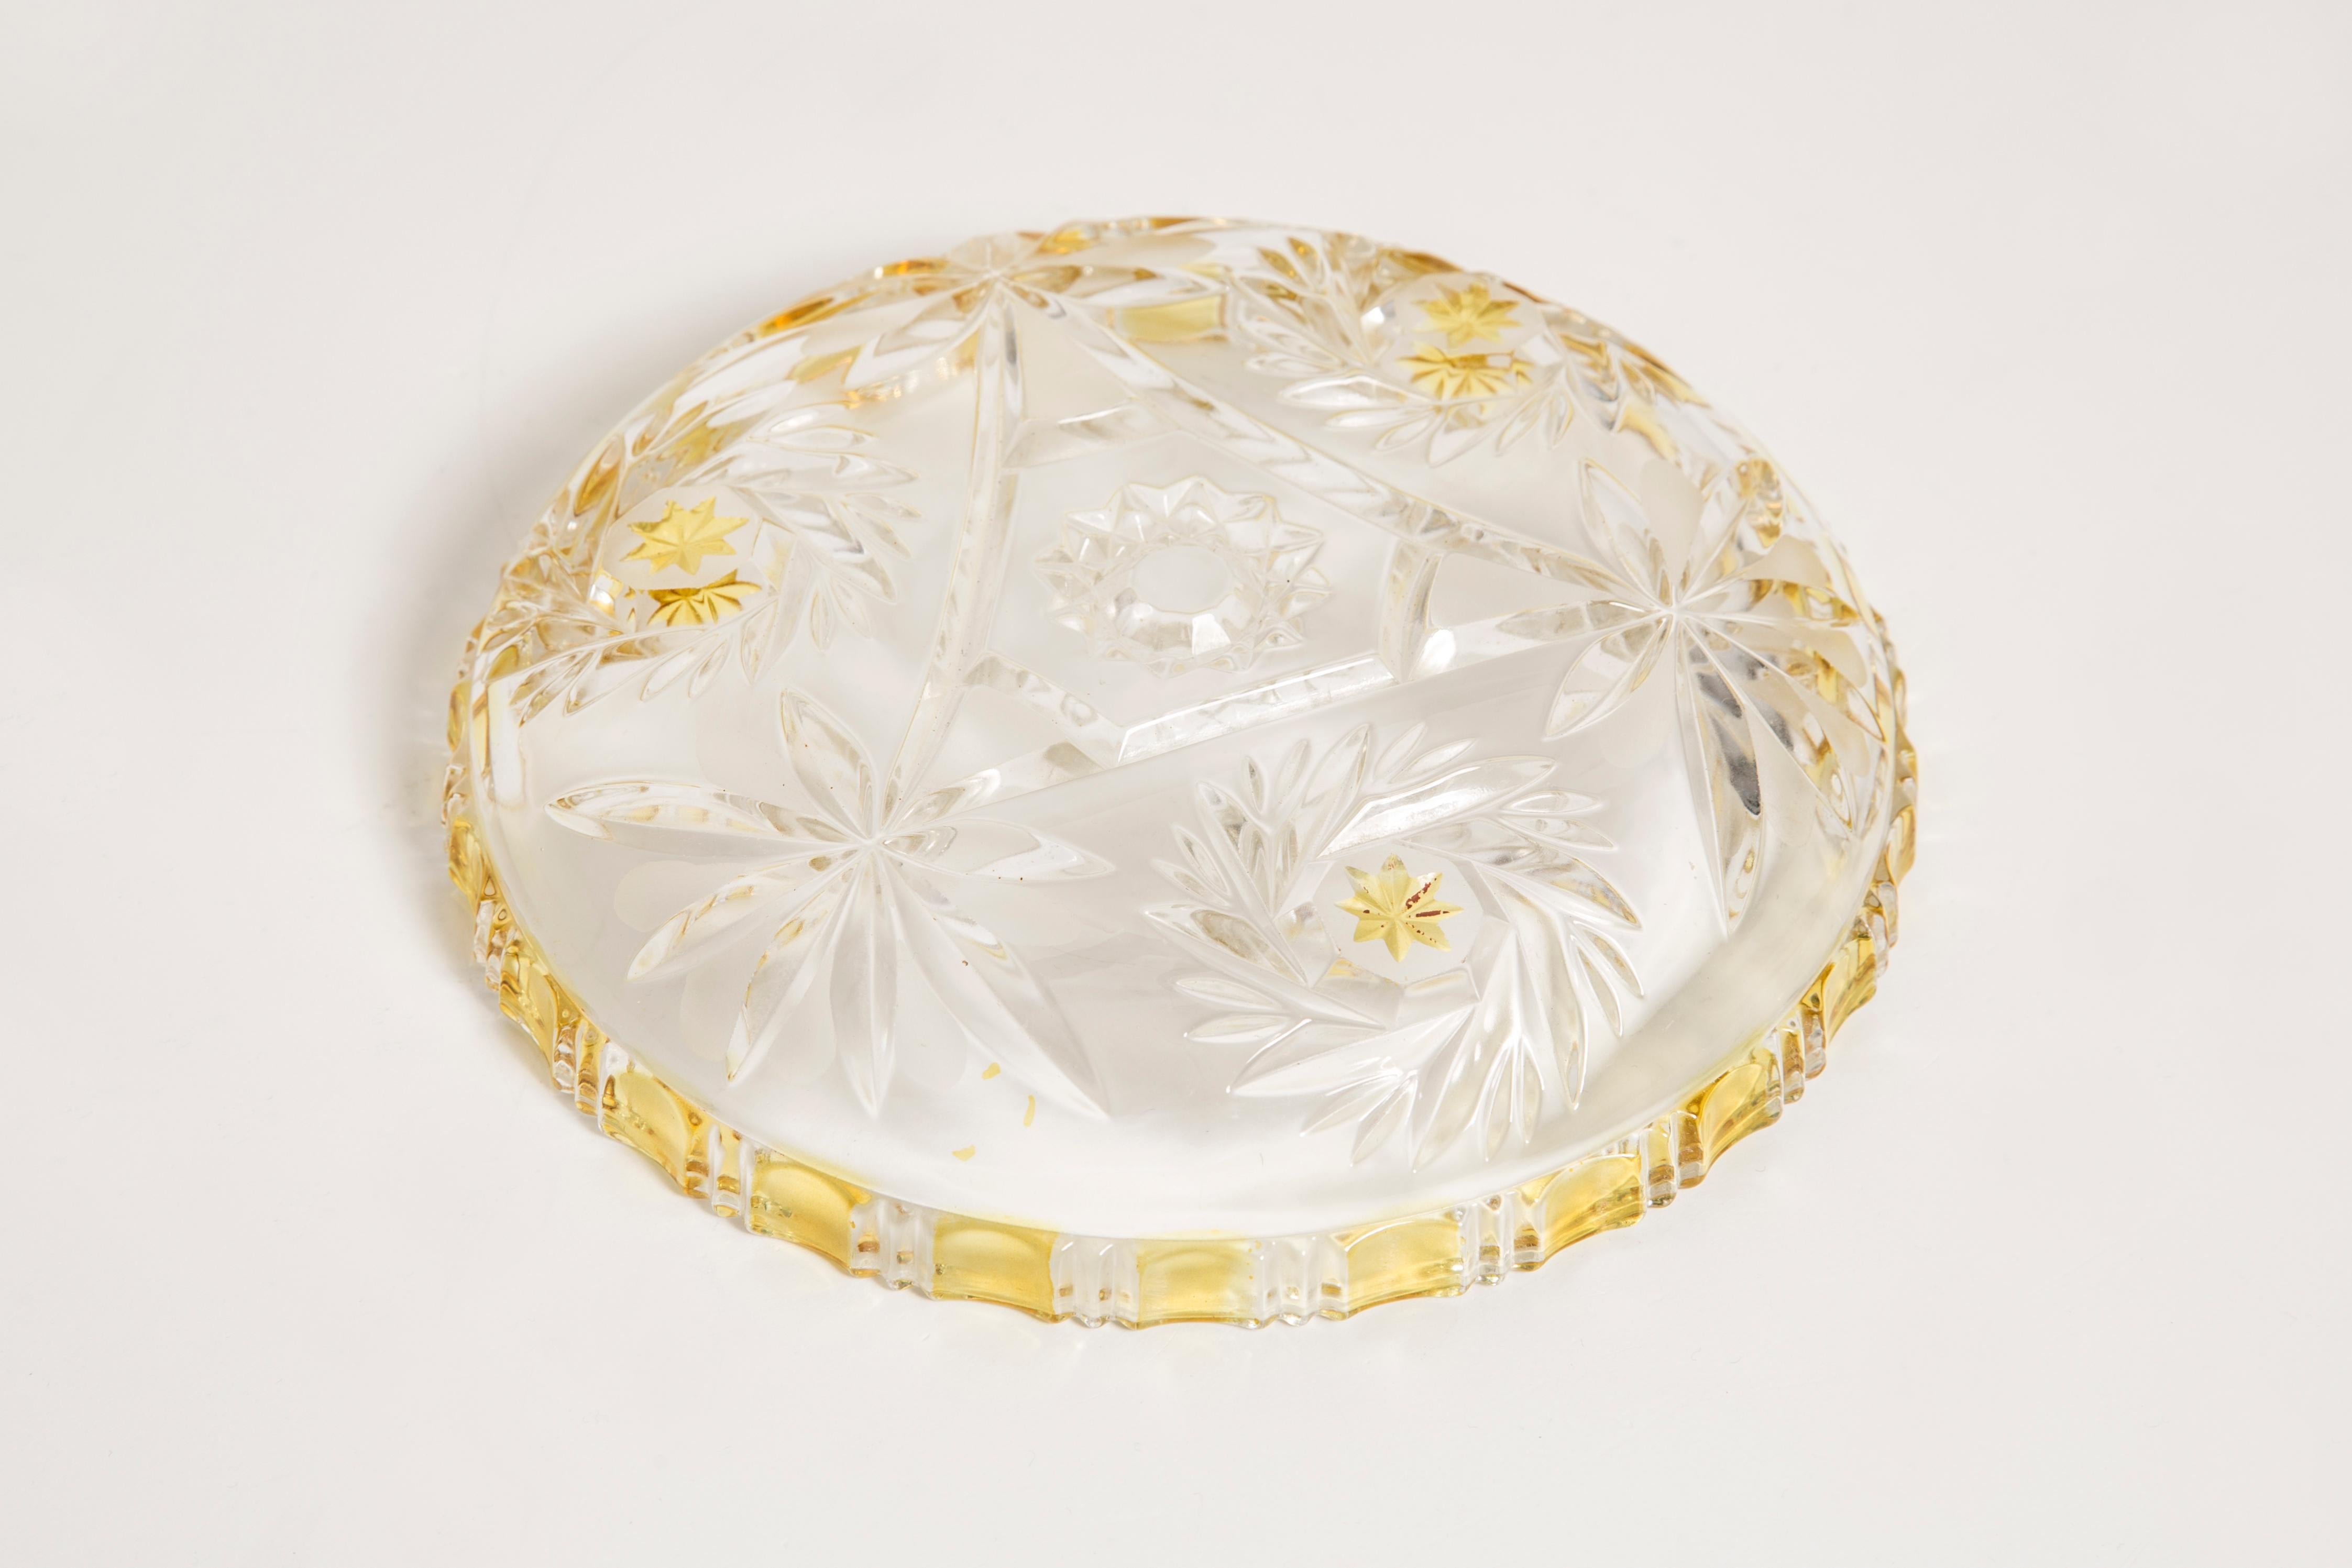 Vintage Transparent and Yellow Decorative Glass Plate, Italy, 1960s For Sale 7